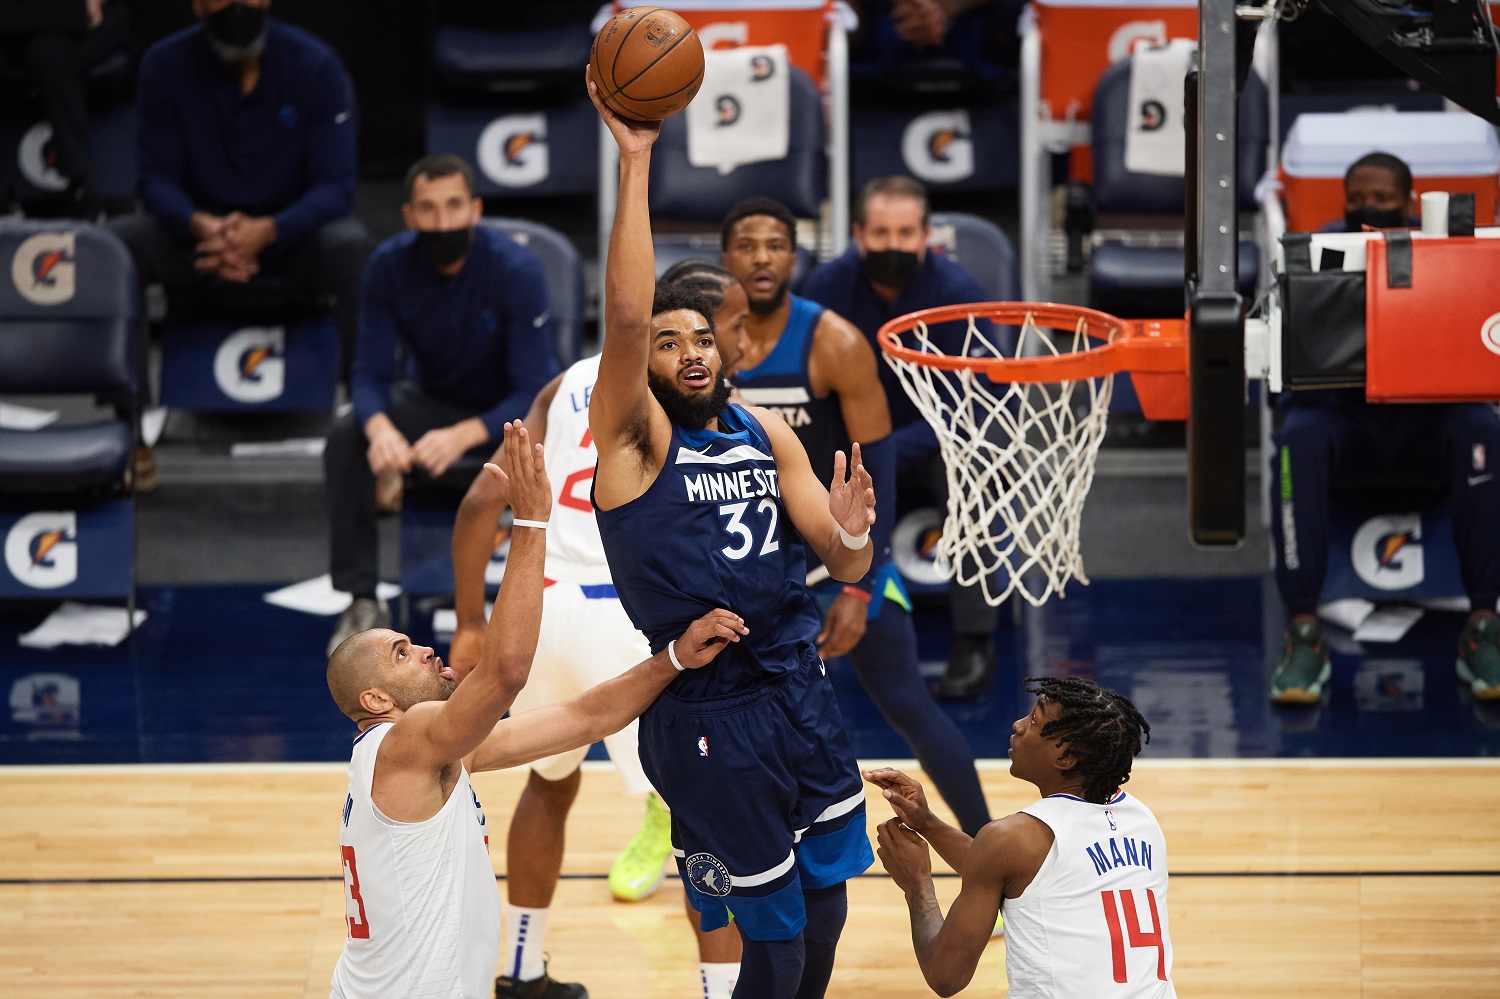 Karl-Anthony Towns returned to action for the NBA's Minnesota Timberwolves on Feb. 10, 2021.